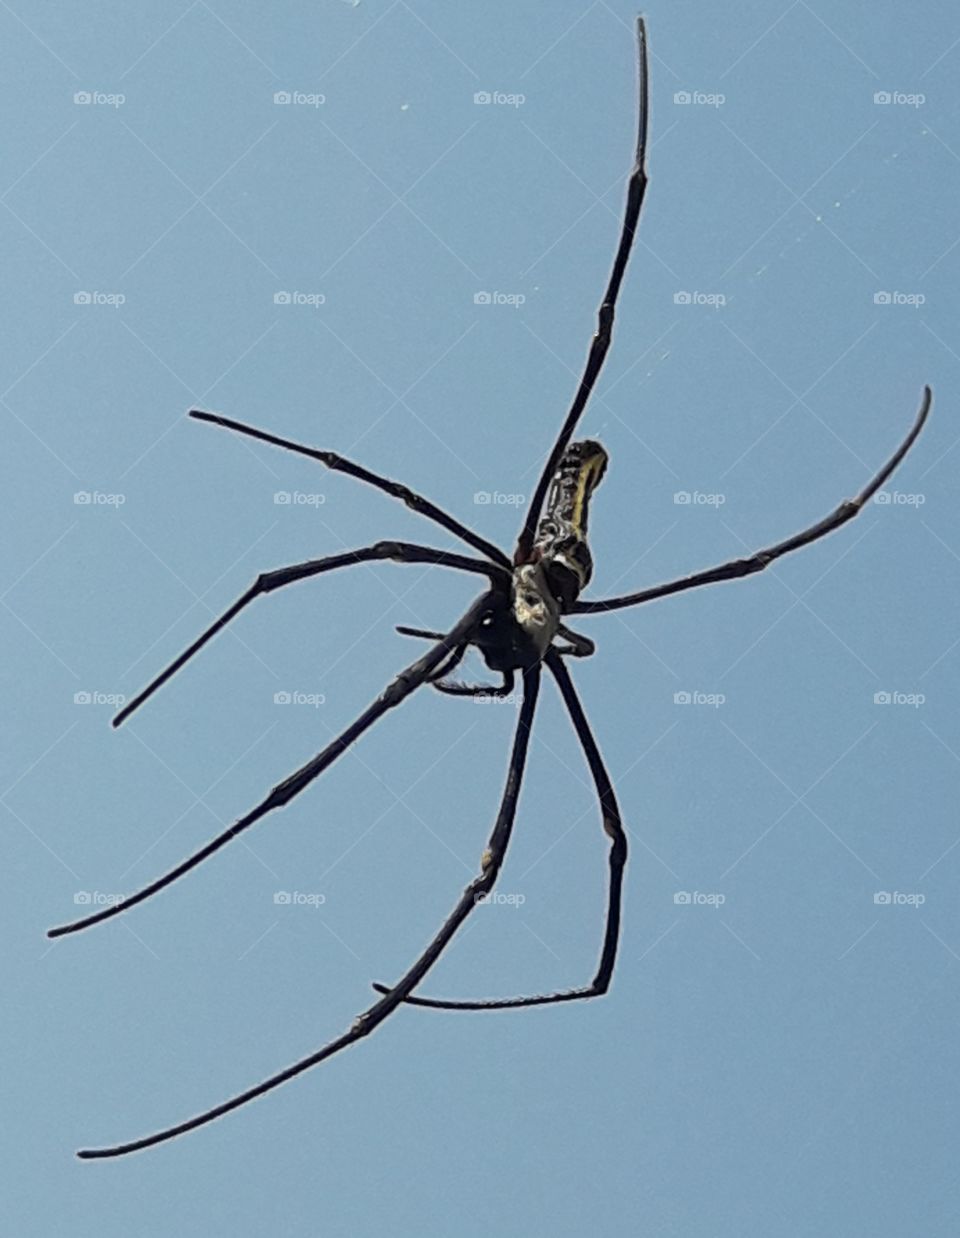 This is big Spider, he is creating net in the sky, I did not believe seeing it.It is making a trap to fill its stomach. It takes a full mesh in an hour.